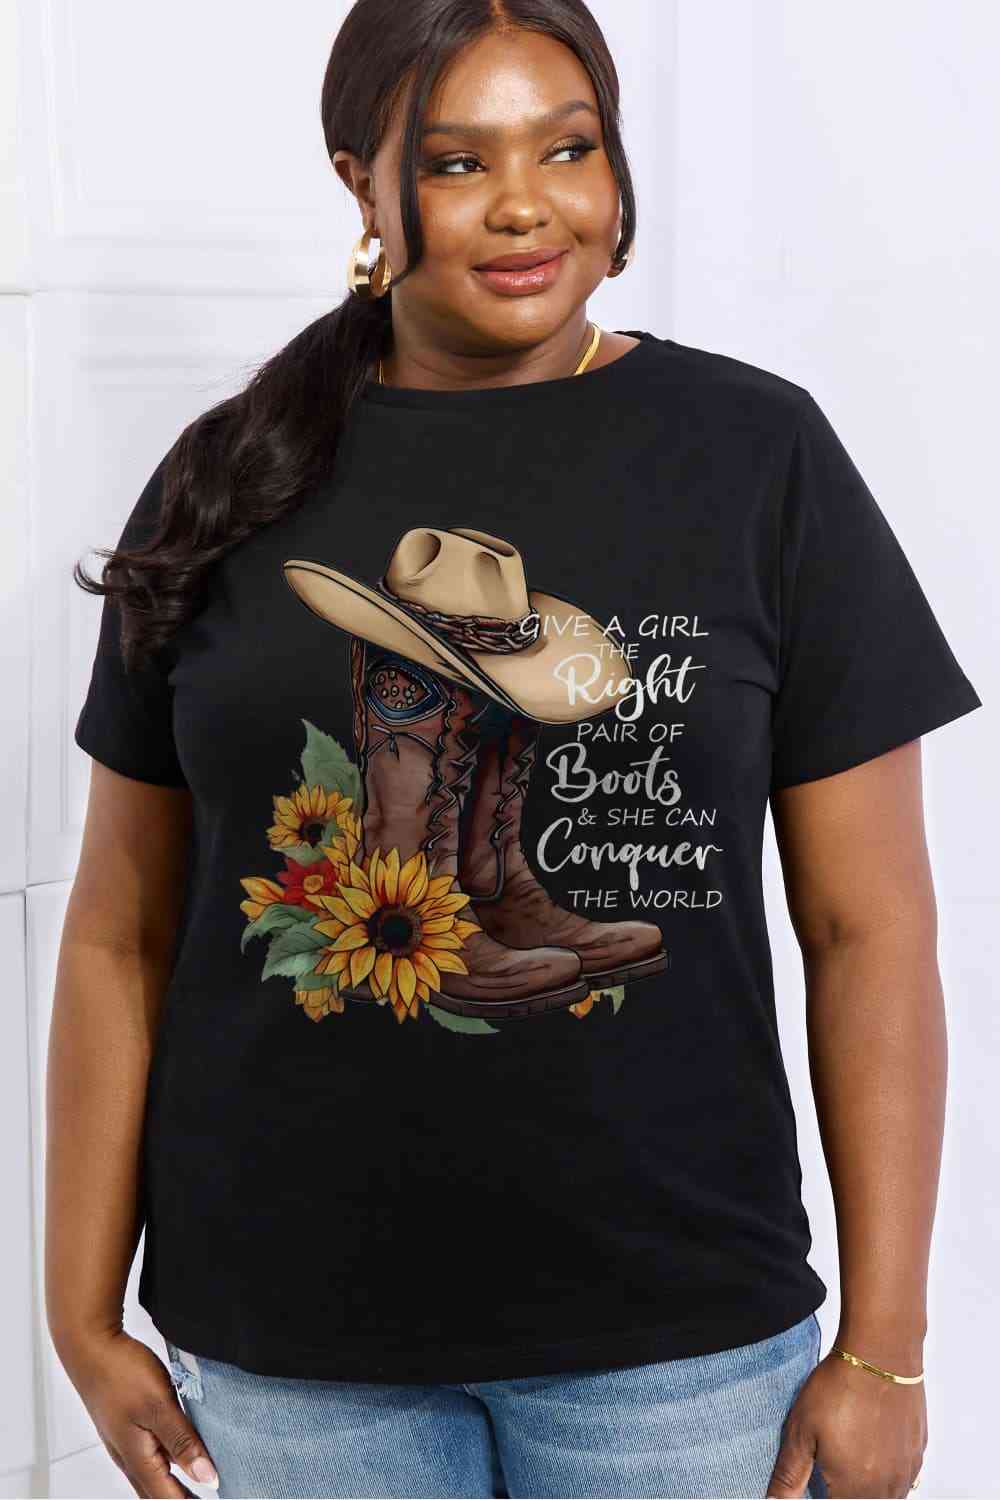 Simply Love Full Size Cowboy Hat & Boots Graphic Cotton Tee - Guy Christopher